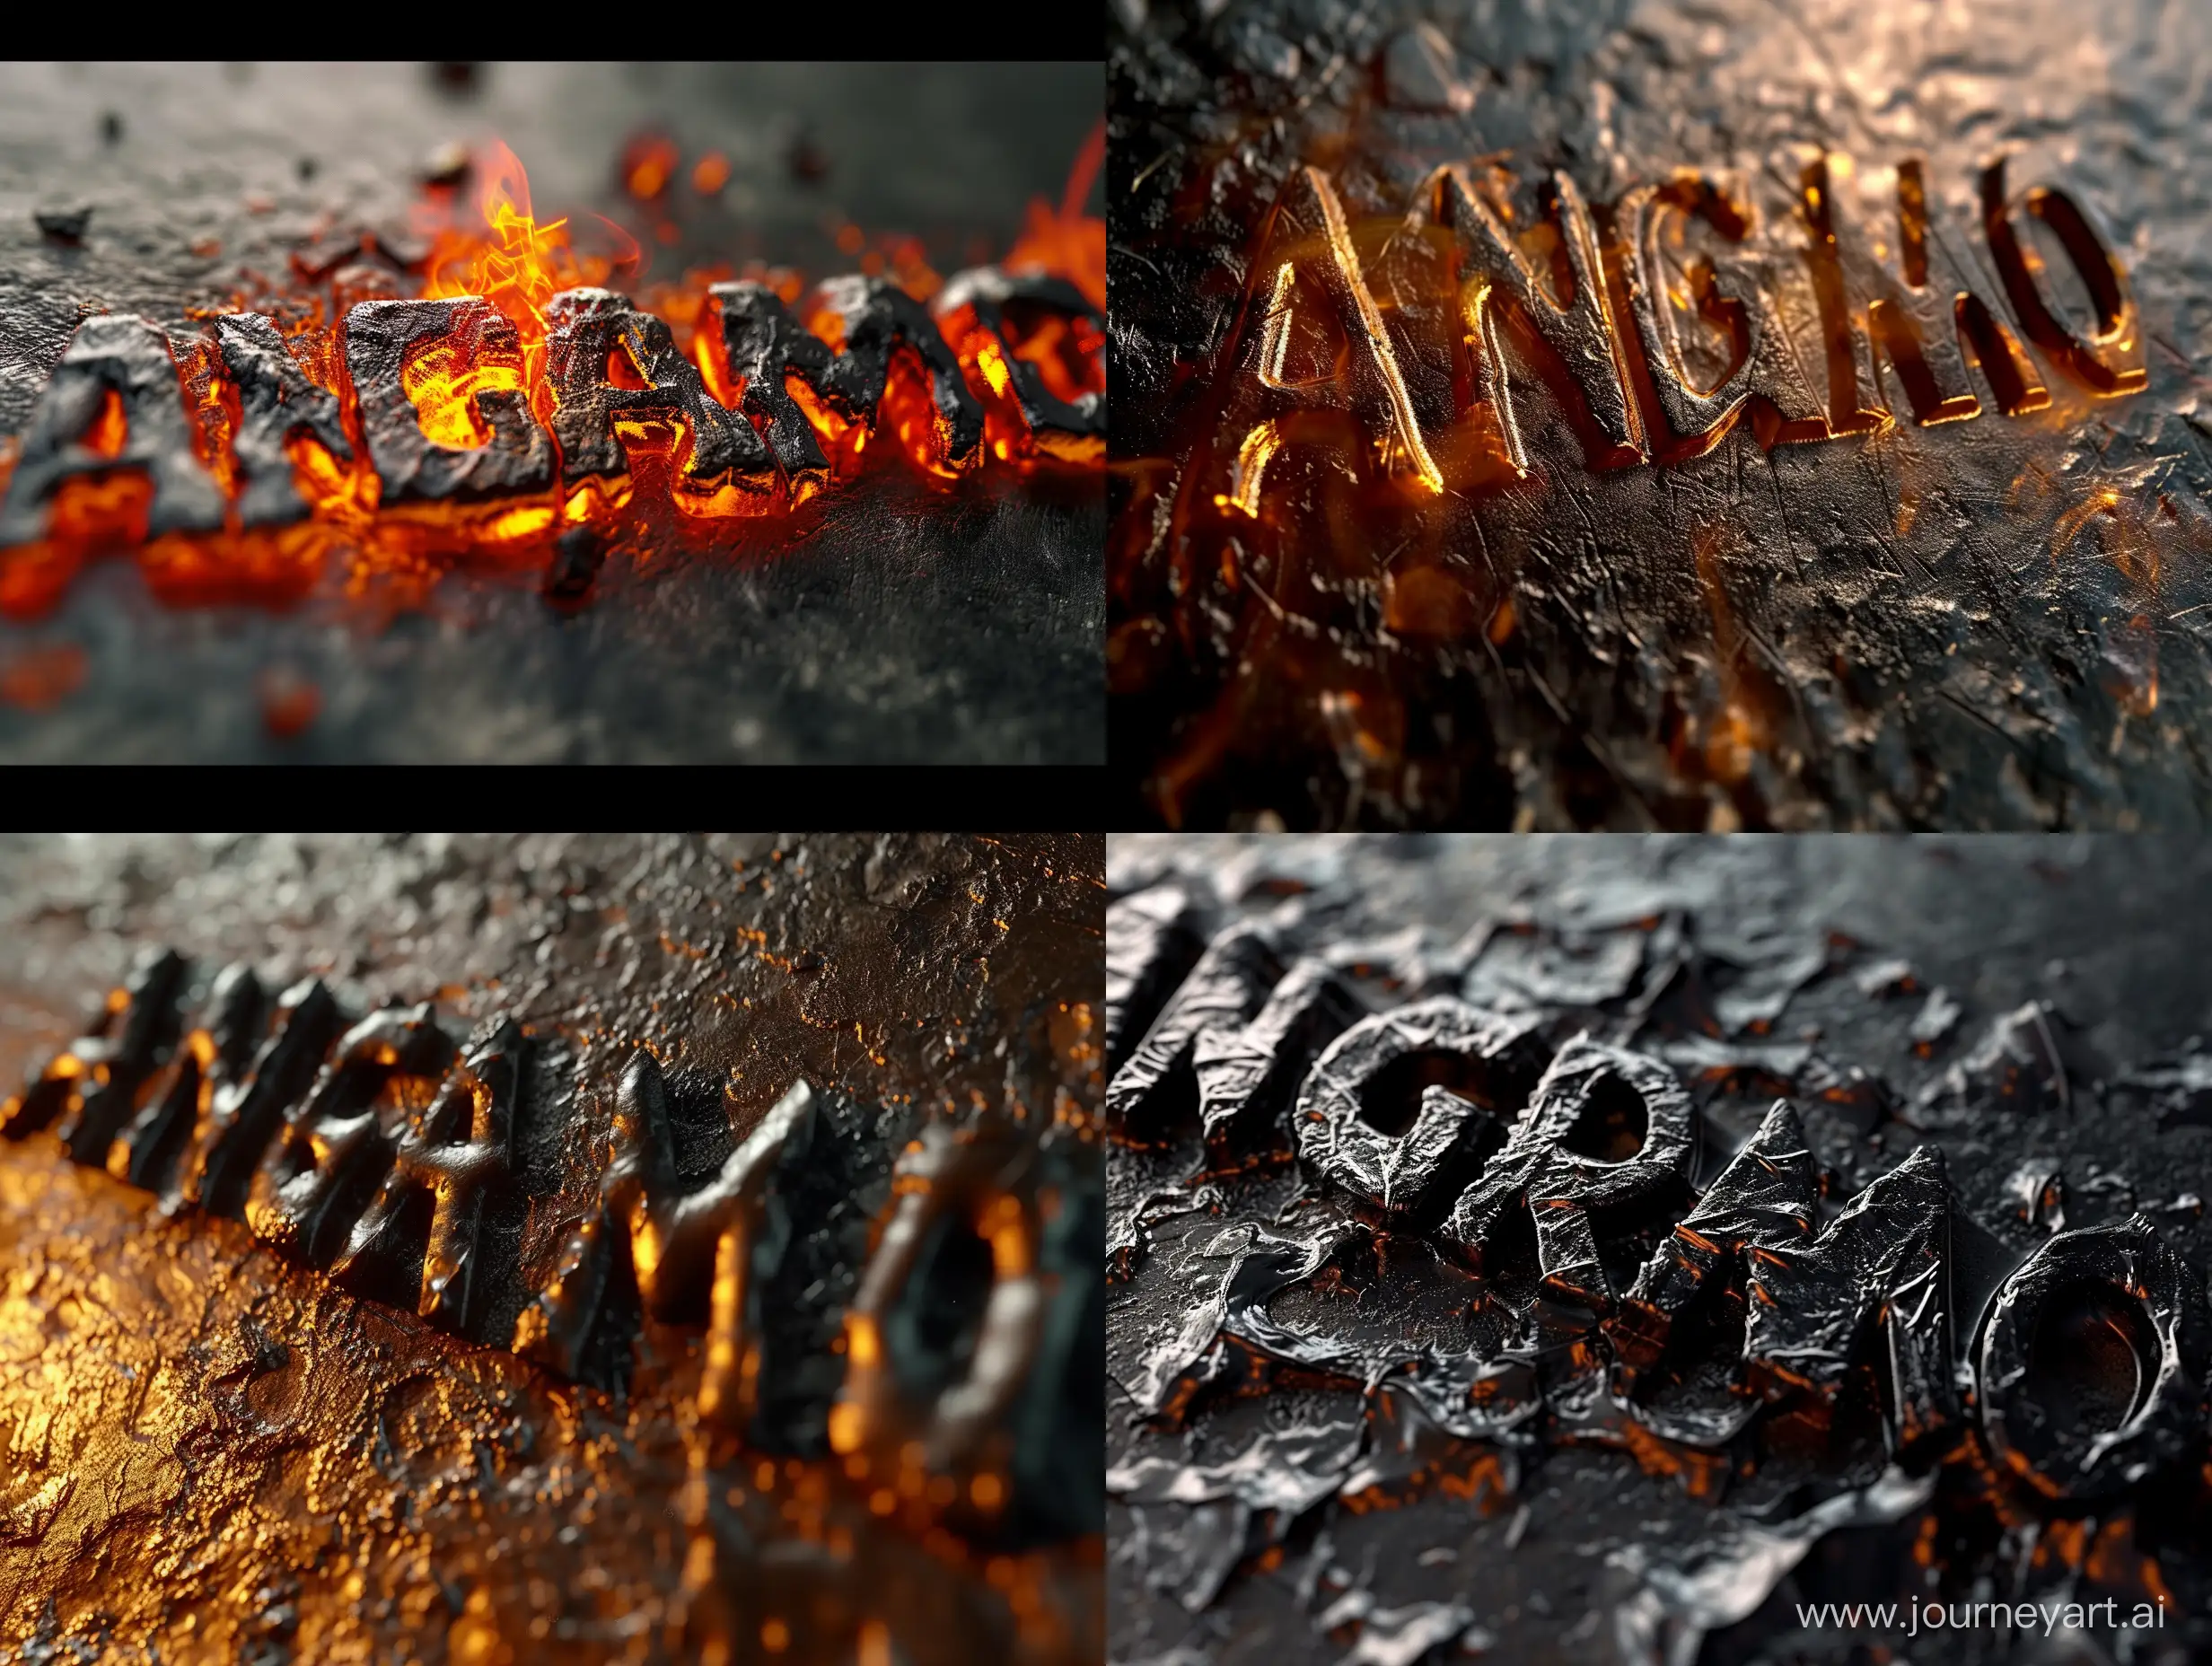 Hot, molten, embossed 3D metallic text strictly titled as "ANGRAMO GFX"